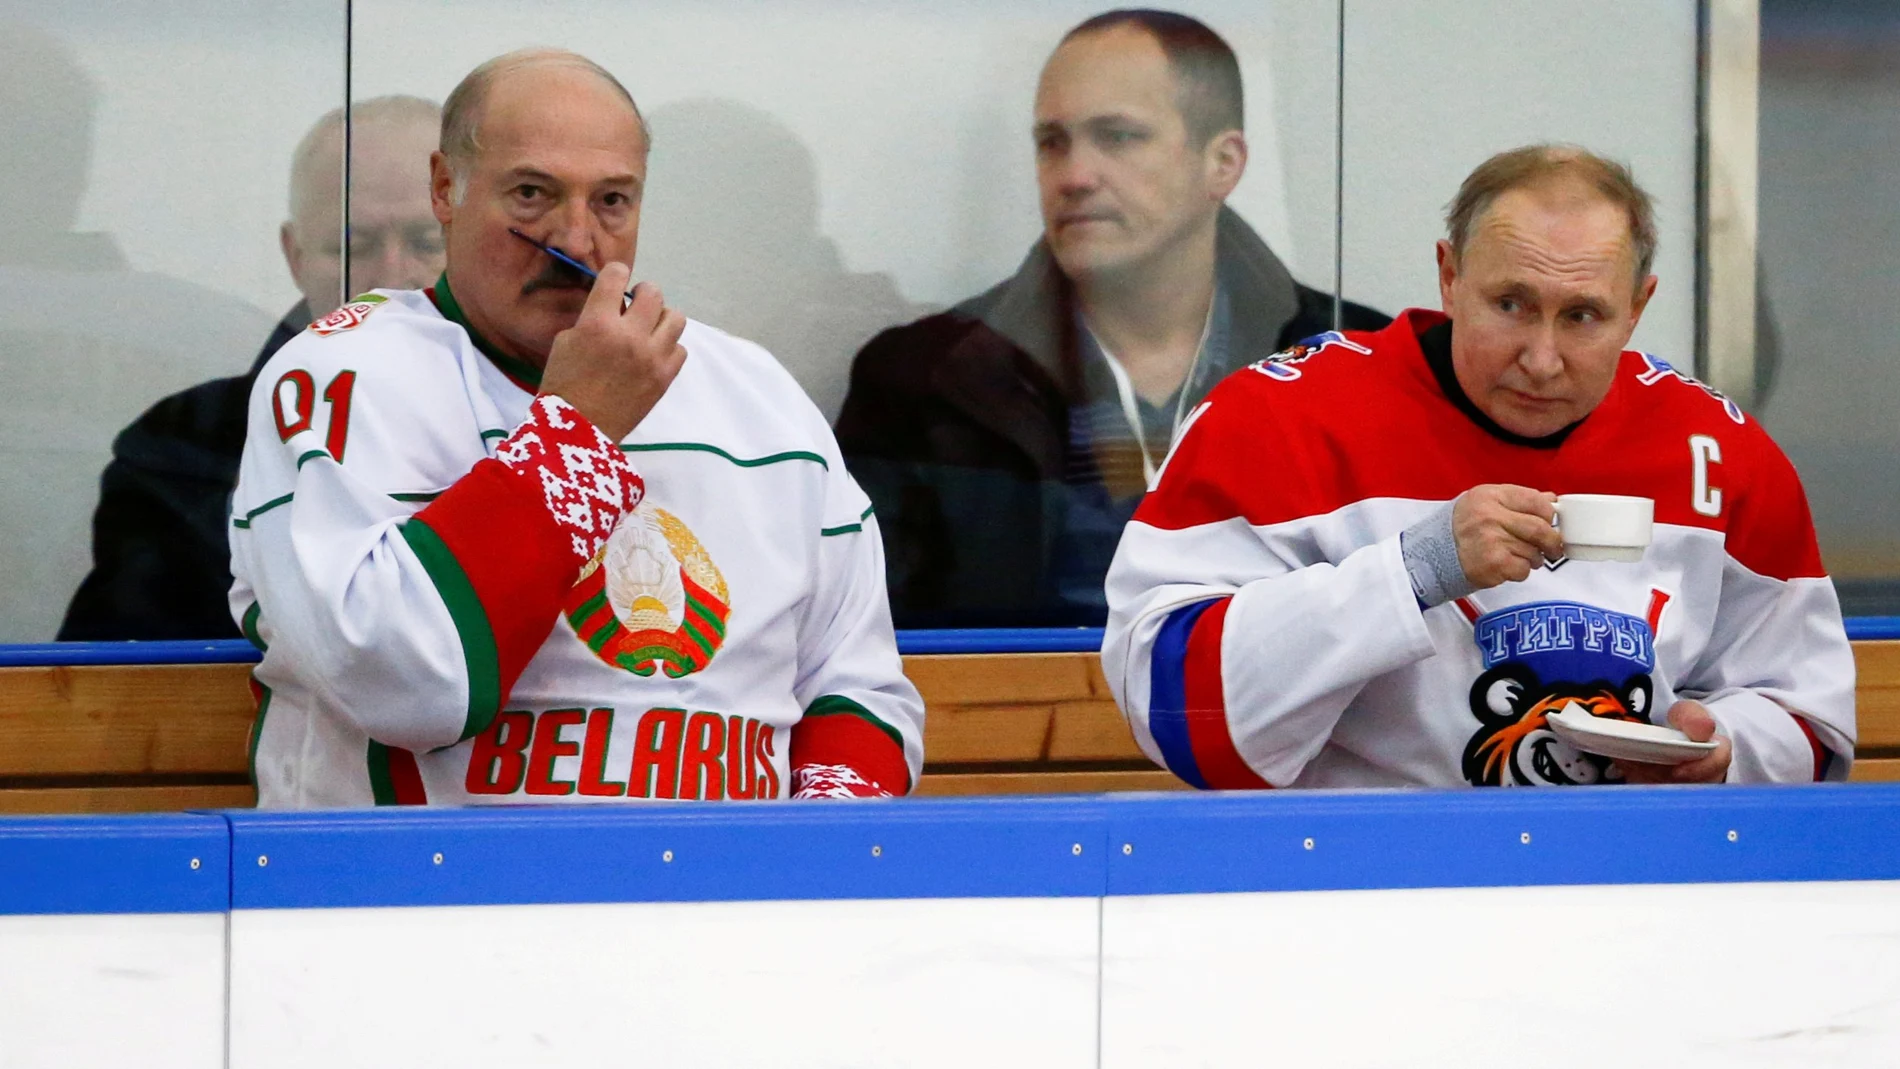 FILE PHOTO: FILE PHOTO: Russian President Vladimir Putin and Belarusian President Alexander Lukashenko take a break during a match of the Night Hockey League teams in Rosa Khutor in the Black Sea resort of Sochi